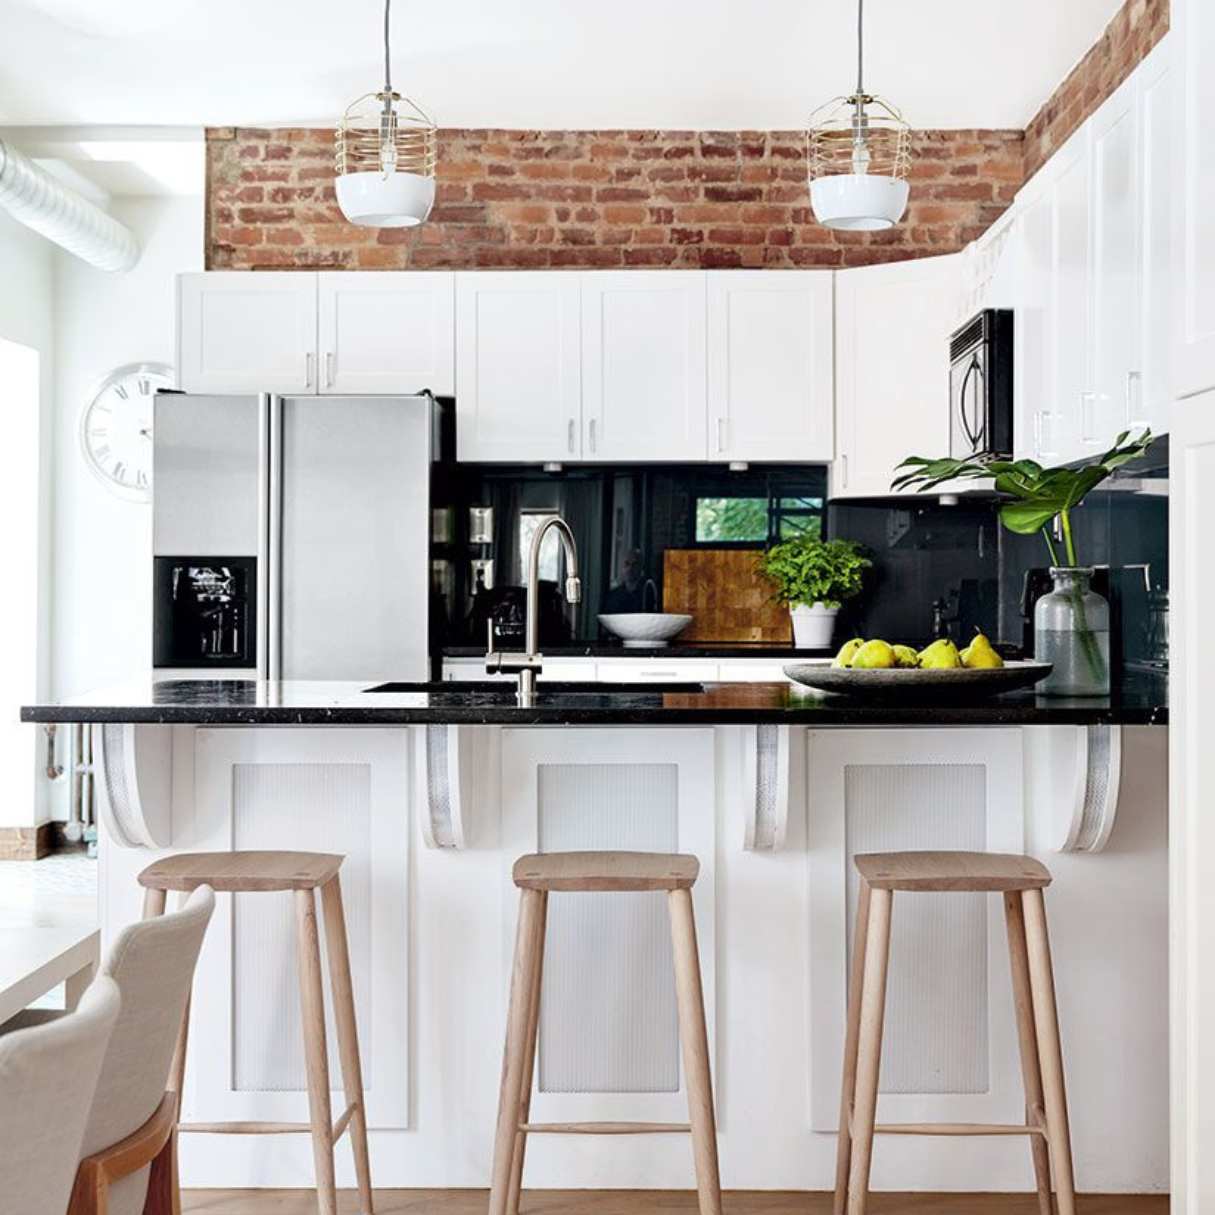 Decorating Above Kitchen Cabinets: 10 Statement Looks